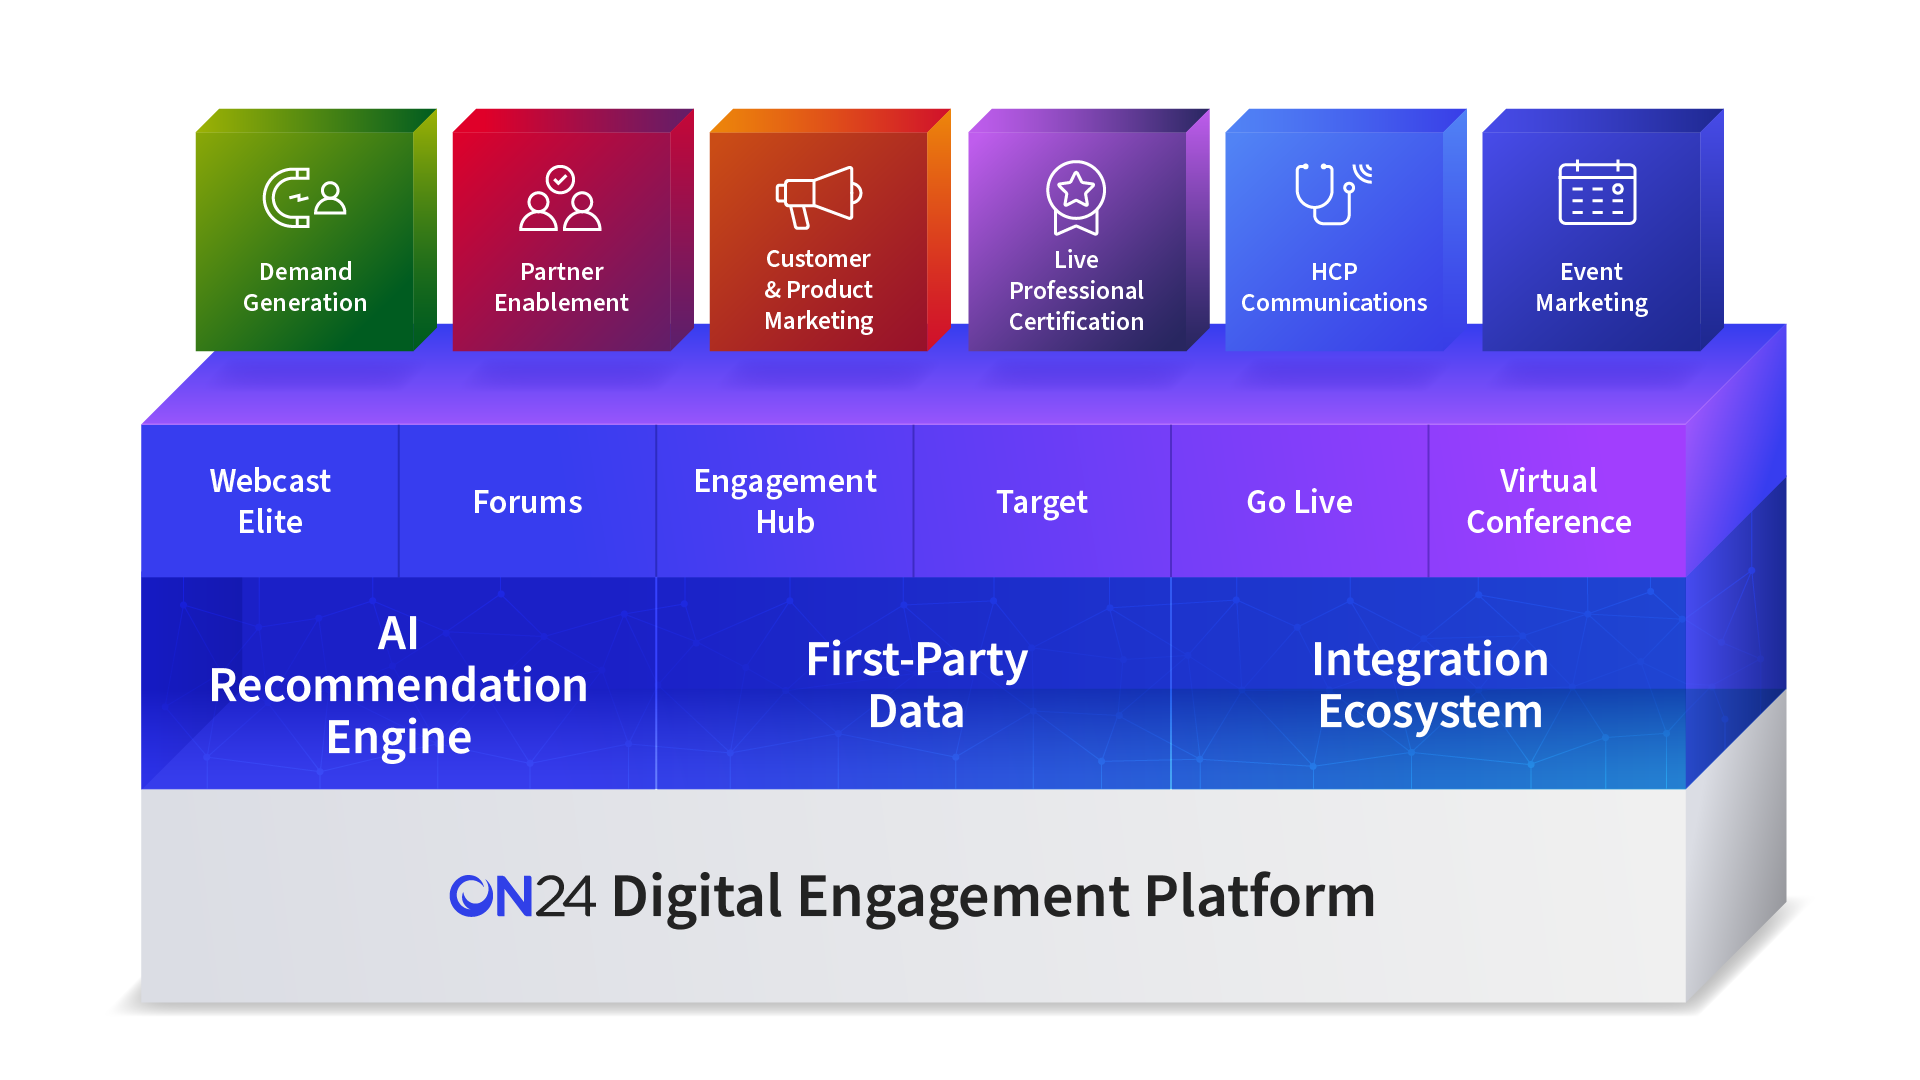 The ON24 Digital Engagement Platform Architecture. At the top layer we have the use cases we support, including Demand Generation, Partner Enablement, Customer & Product Marketing, Live Professional Certification, HCP Communications and Event Marketing. These use cases are supported by our products, including Webcast Elite, Forums, Engagement Hub, Target, Go Live and Virtual Conference. Below the products are how we differentiate ourselves with our AI Recommendation Engine, First-Party Data and Integration Ecosystem.